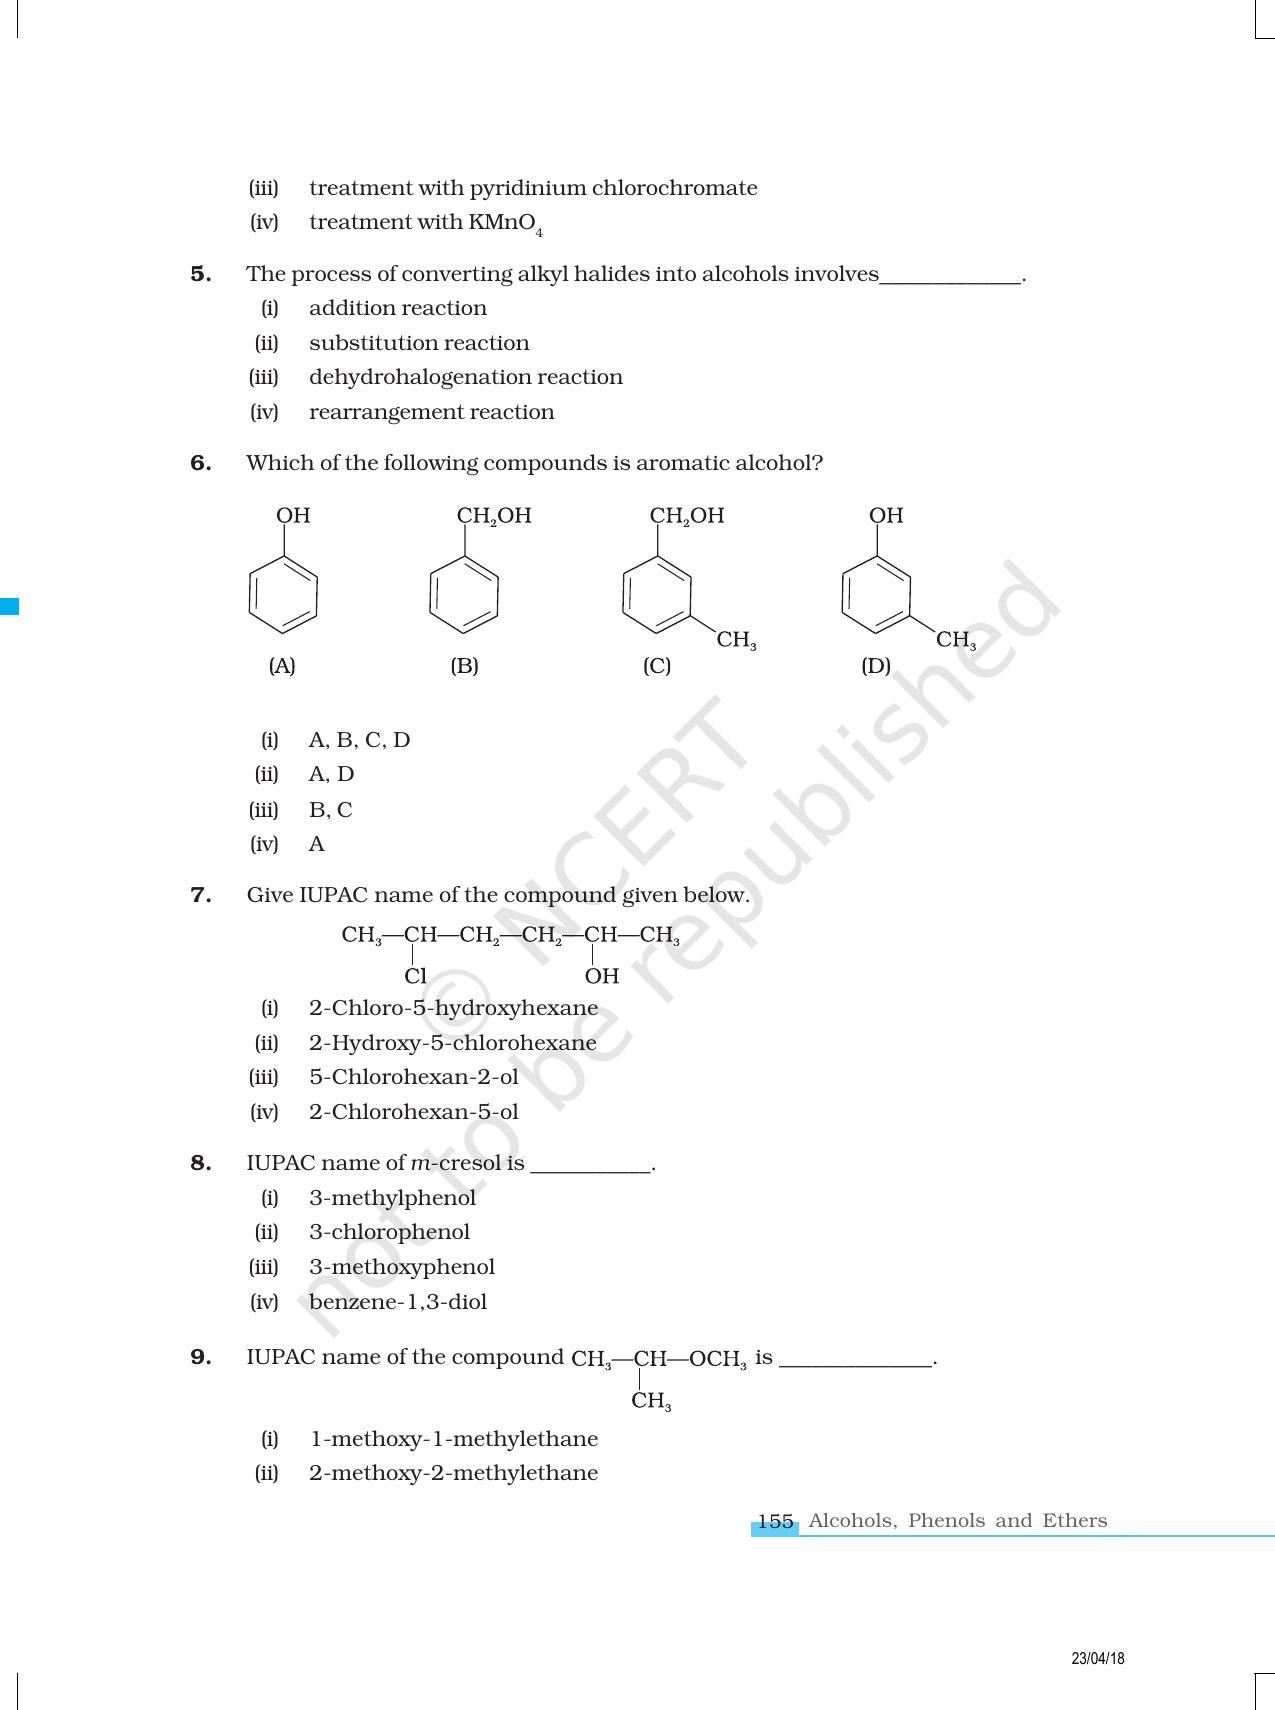 NCERT Exemplar Book for Class 12 Chemistry: Chapter 11 Alcohols, Phenols and Ethers - Page 2